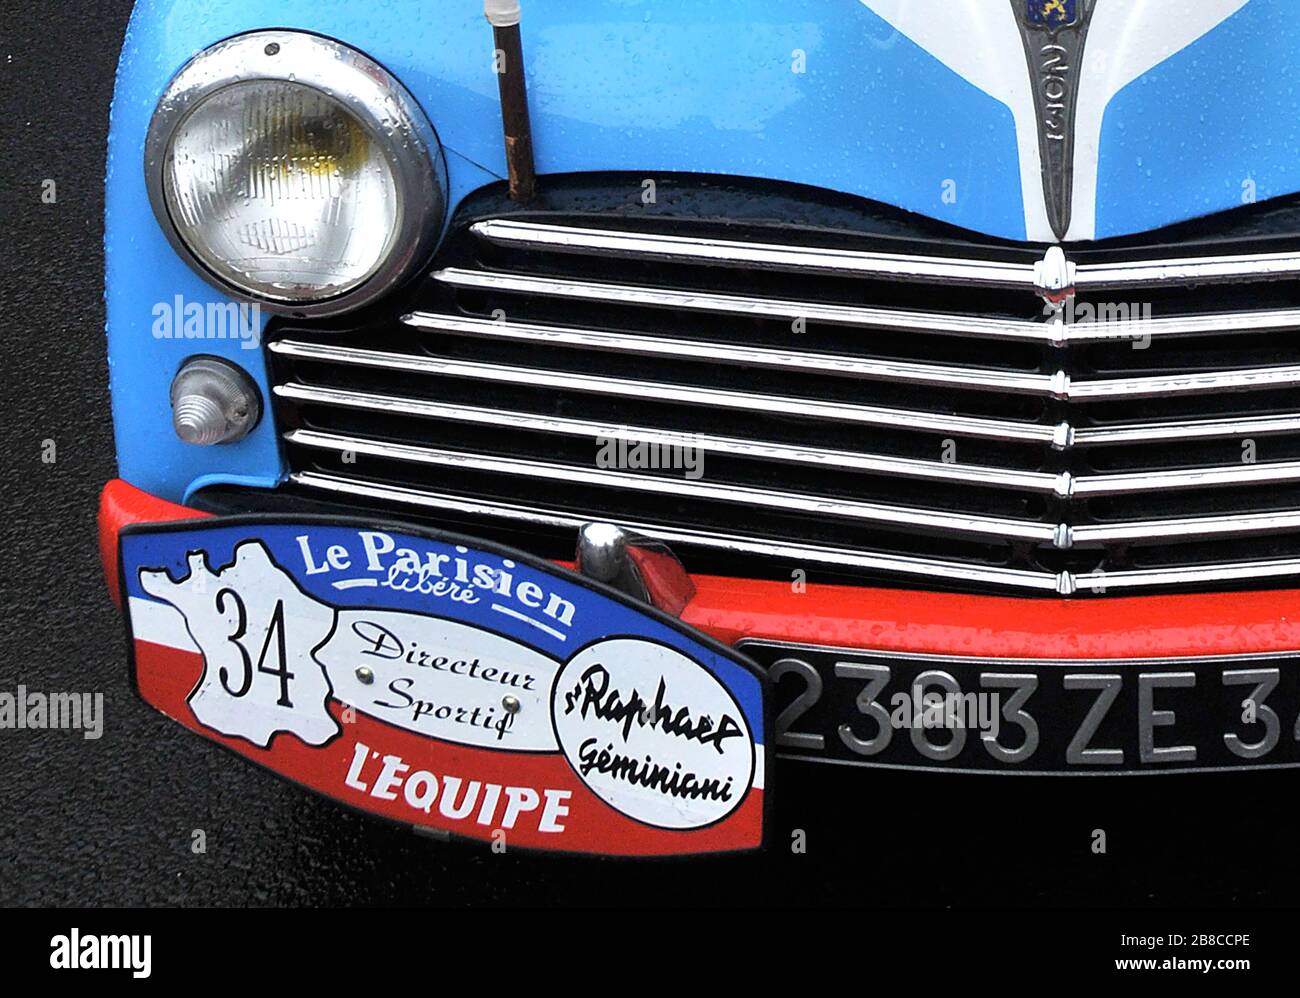 old car of Tour de France, Peugeot 203 of sport manager of St Raphael Geminiani team, Issoire, France Stock Photo